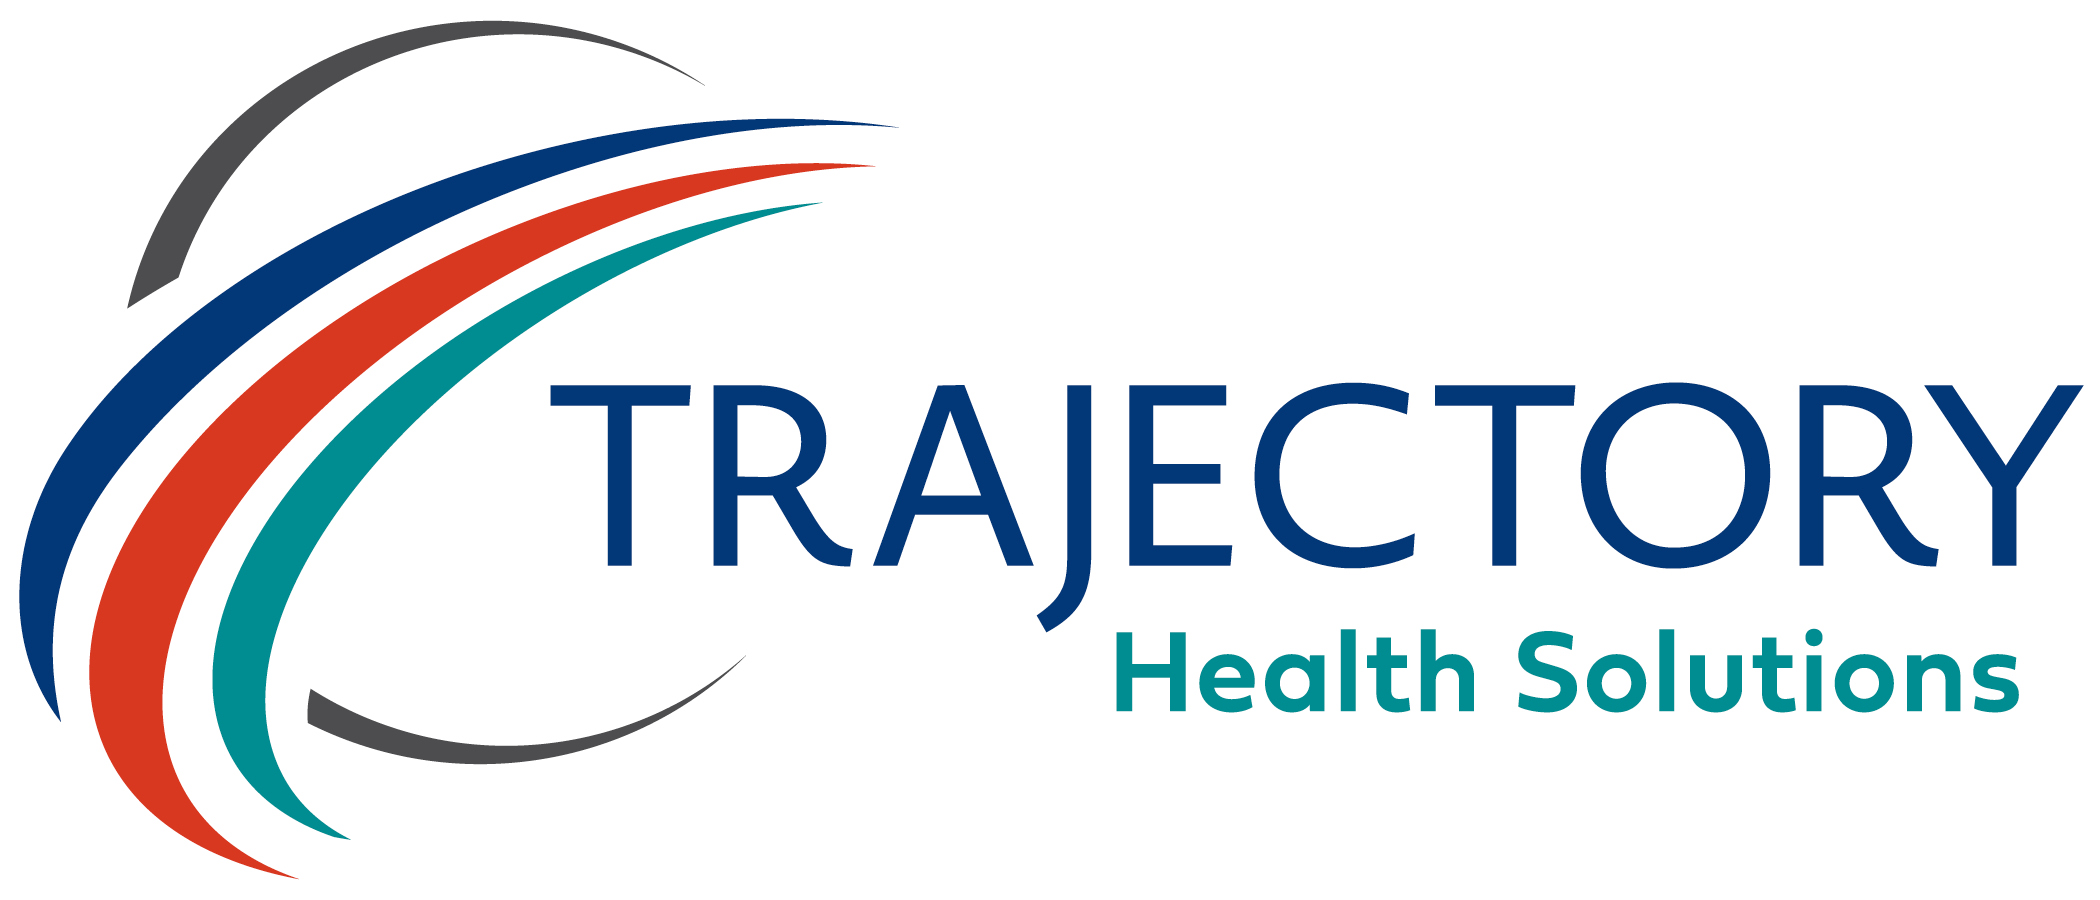 Trajectory Health Solutions